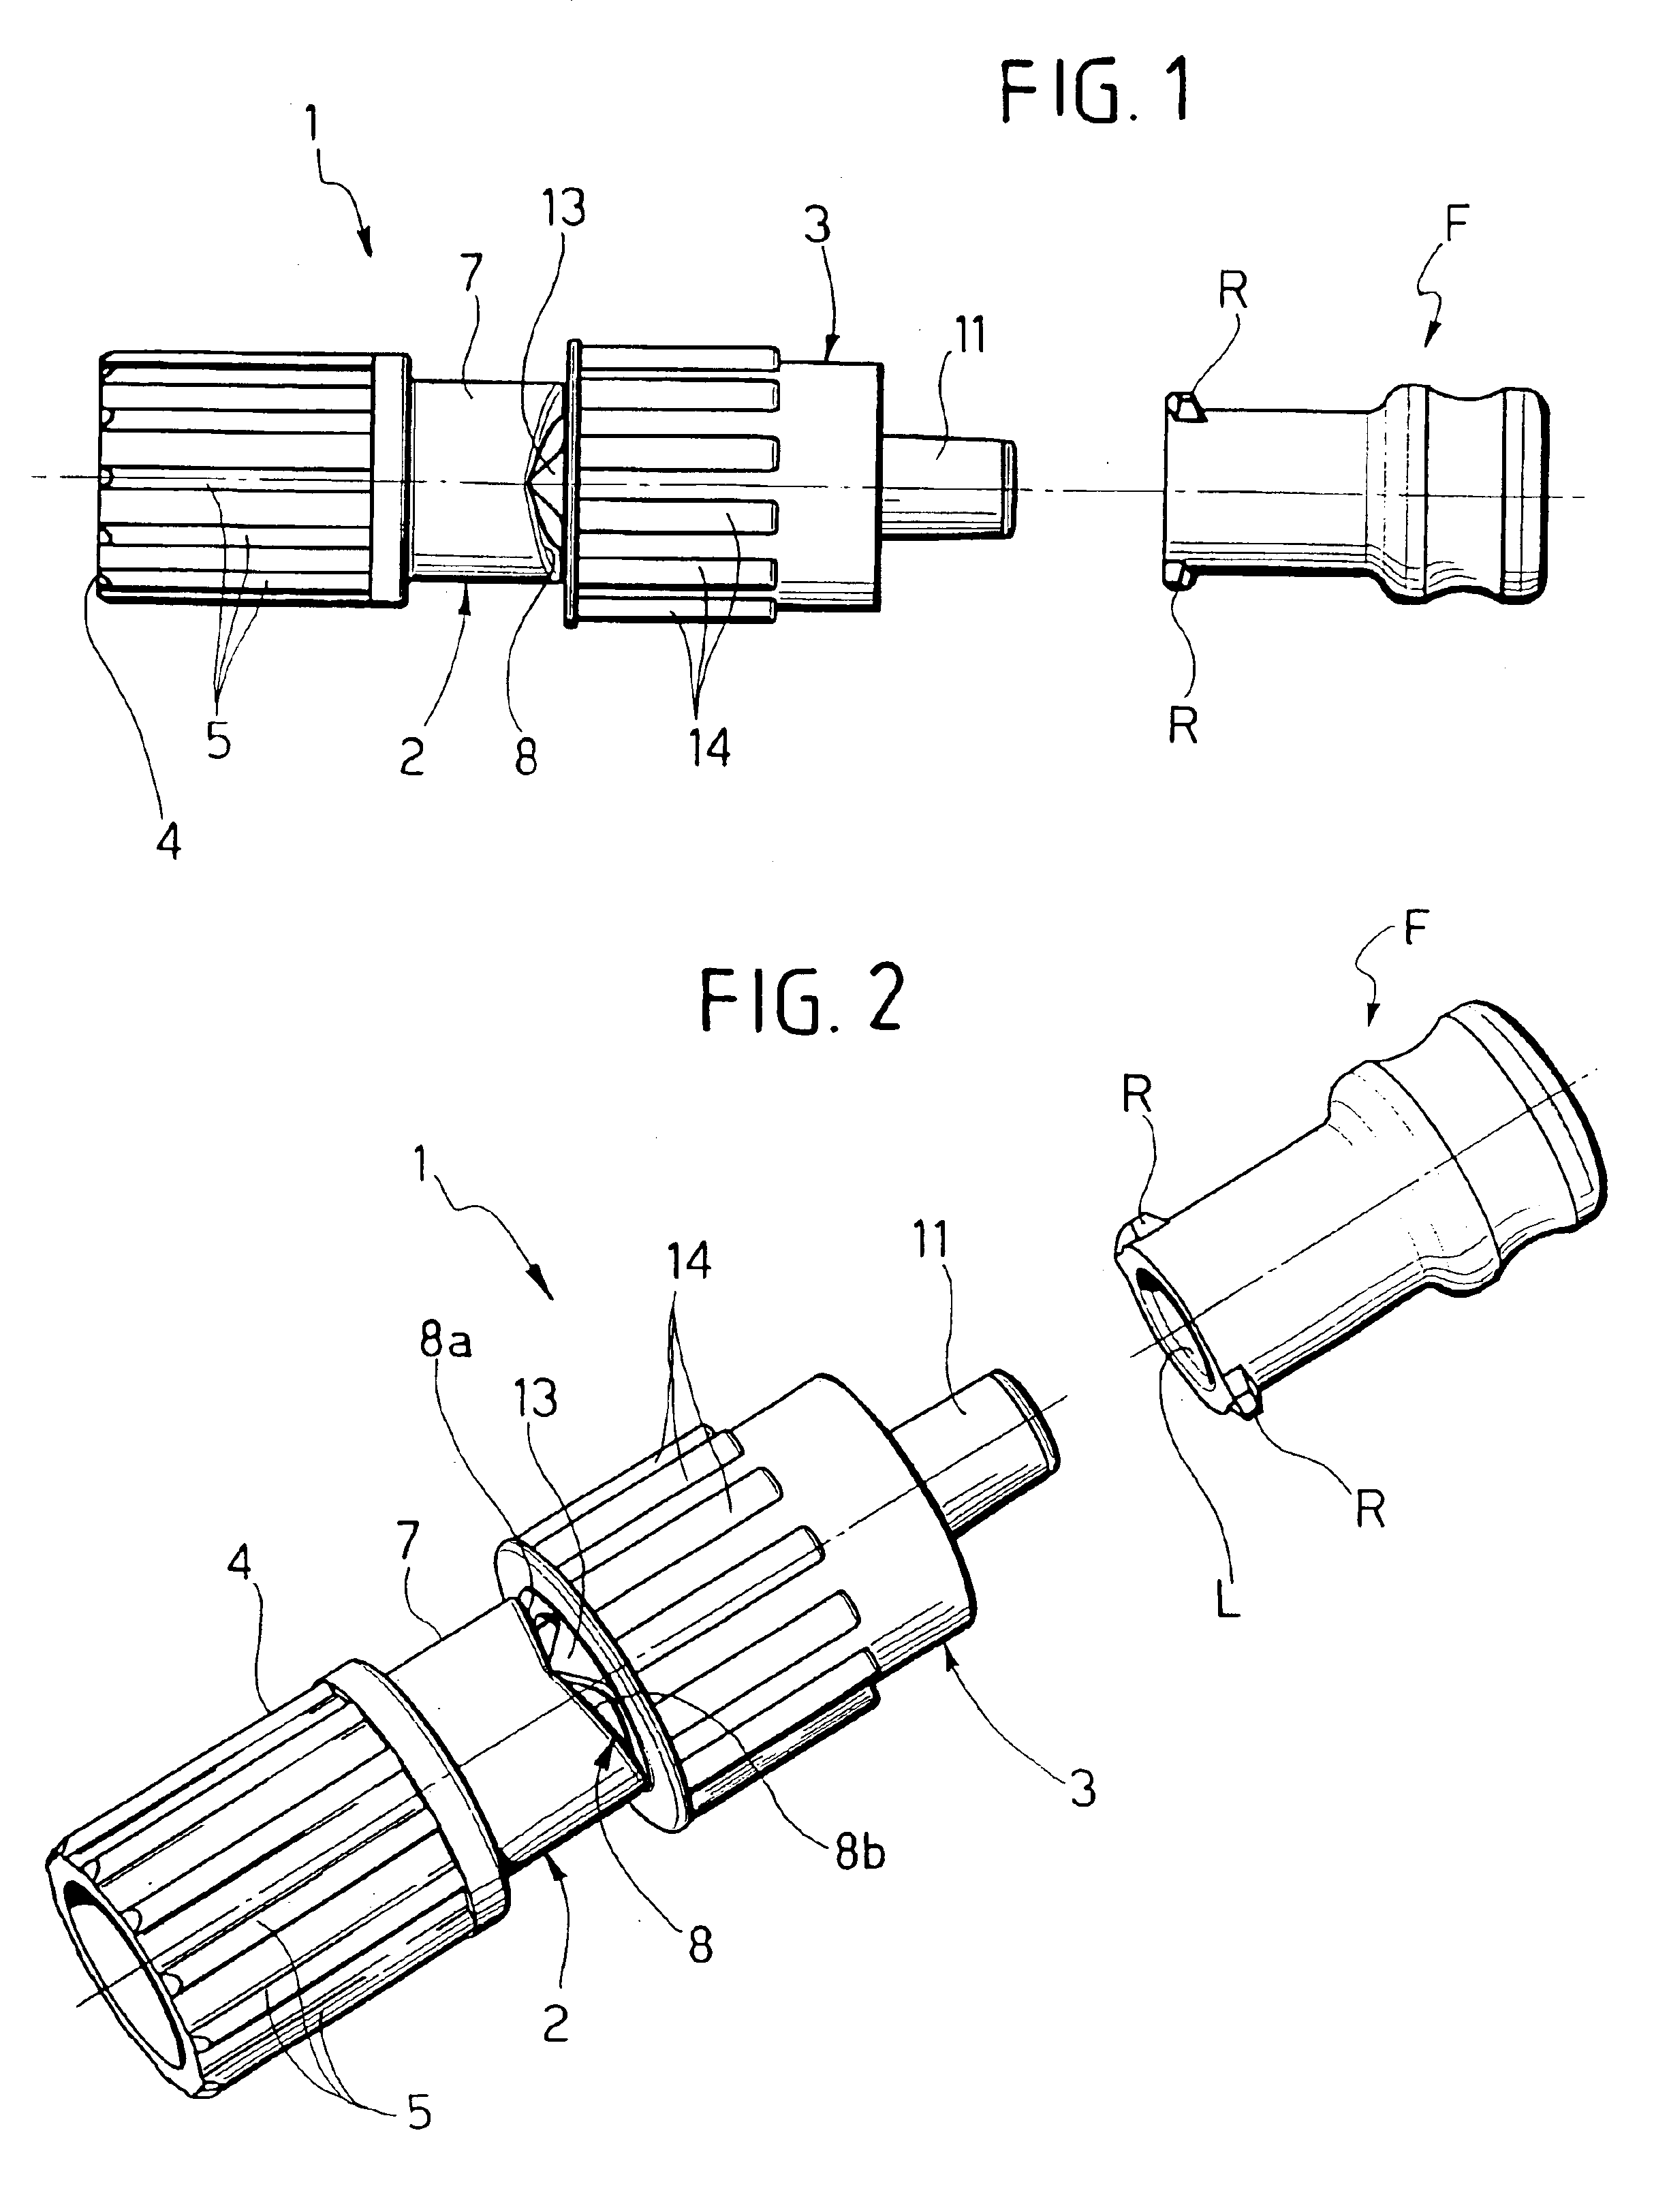 Male luer lock connector for medical fluid lines